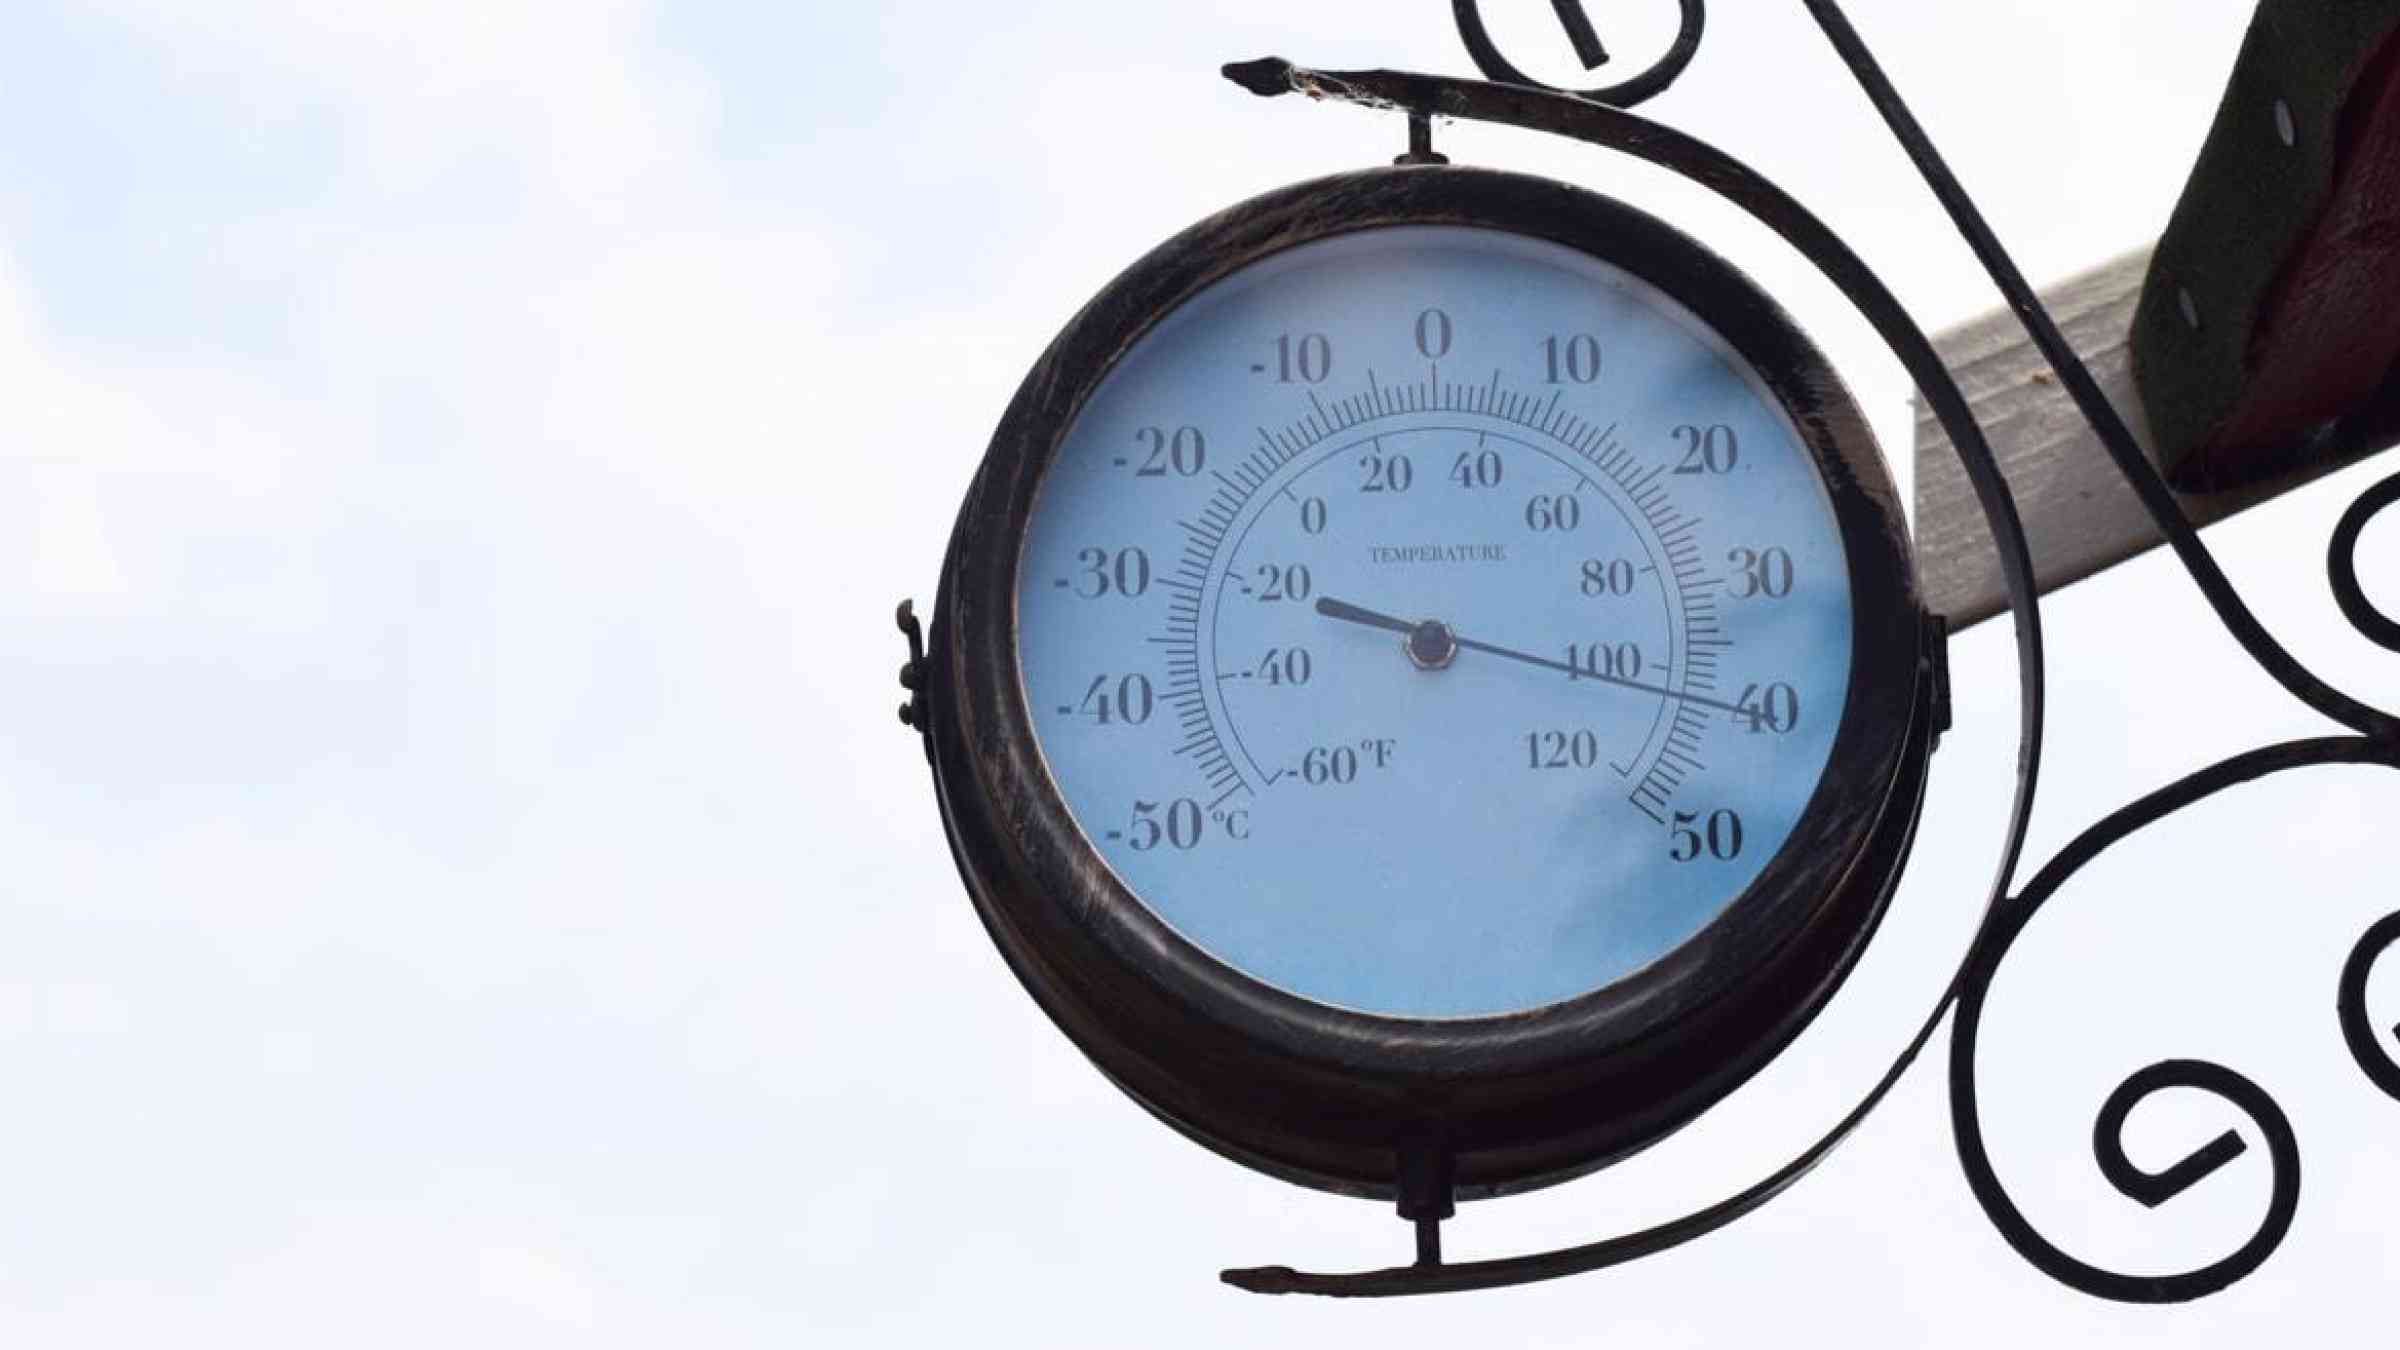 An old-fashioned thermometer in London showing the temperature at 40 C